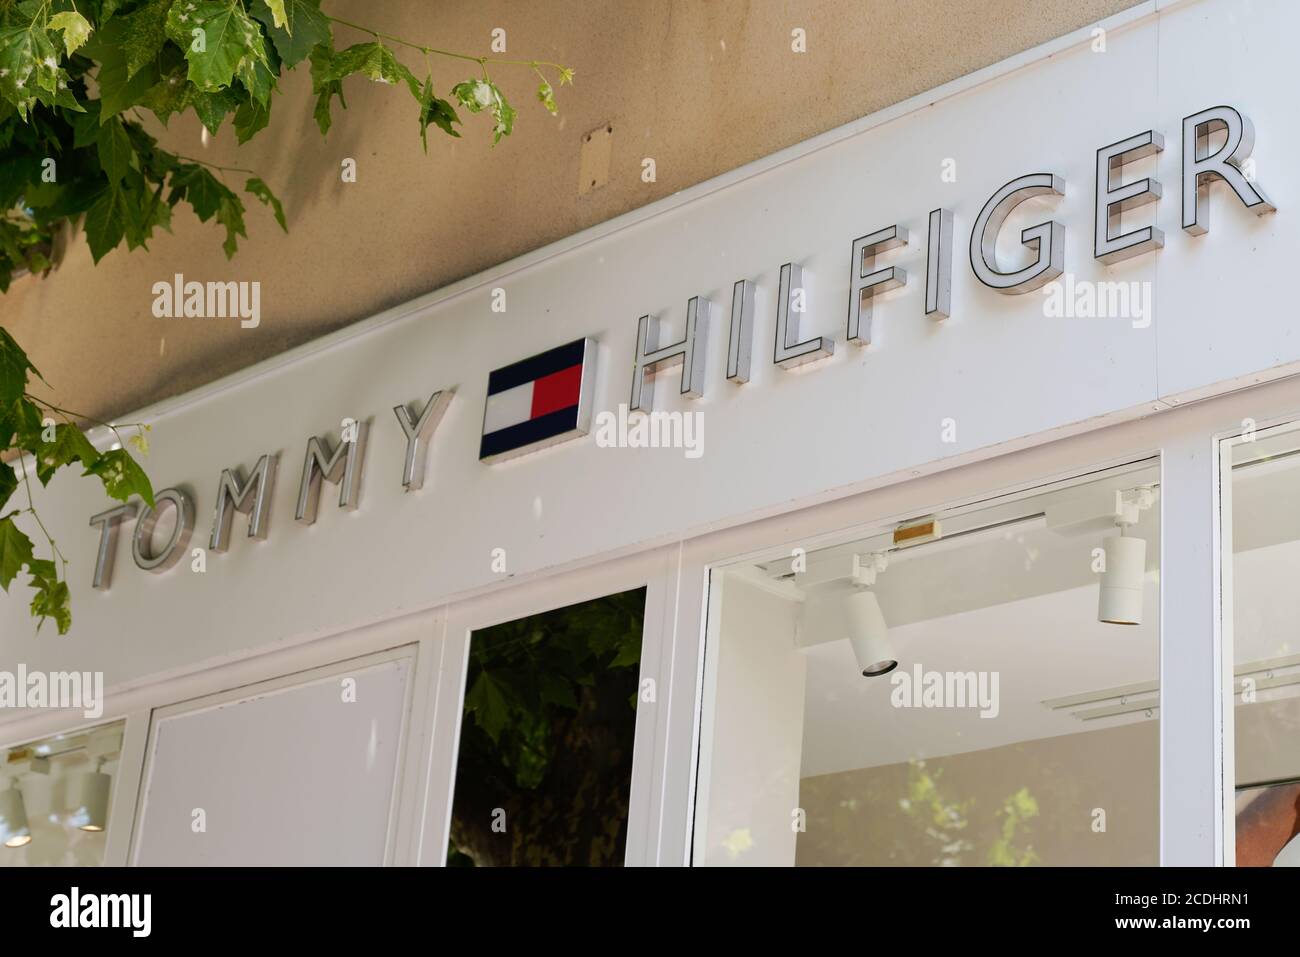 Hilfiger Denim High Resolution Stock Photography and Images - Alamy